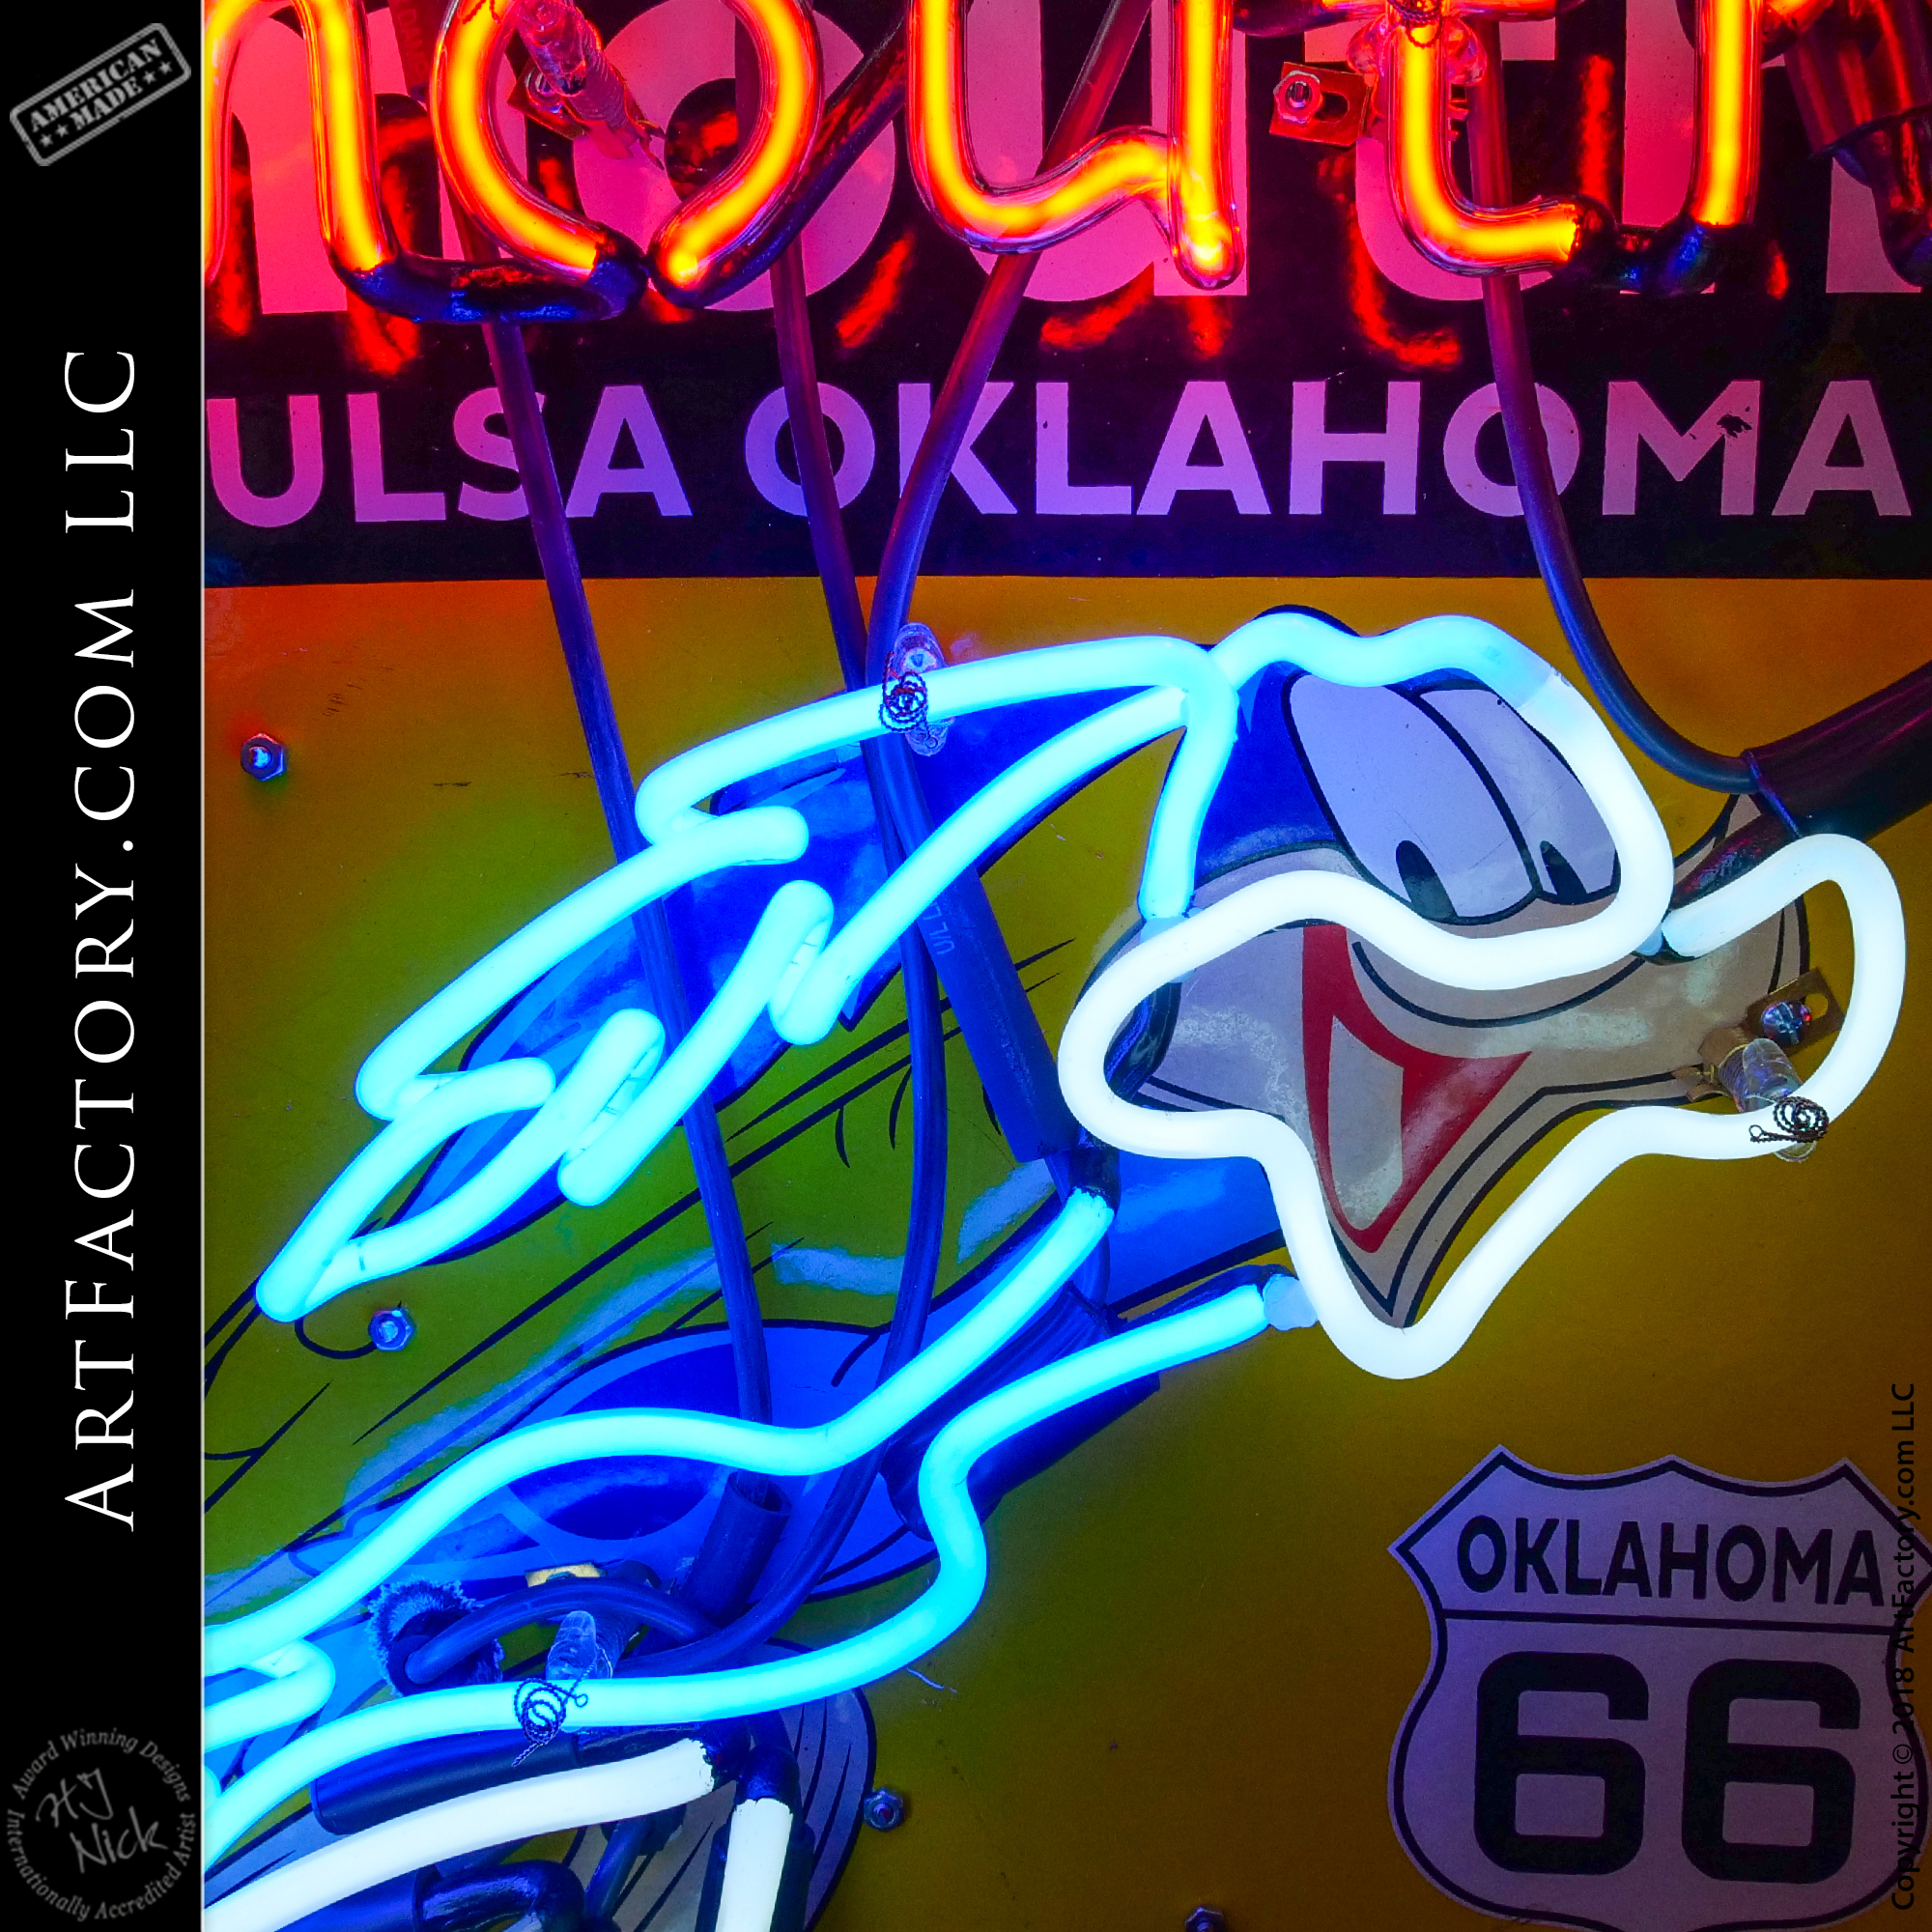 Road Runner Route 66 Neon Sign